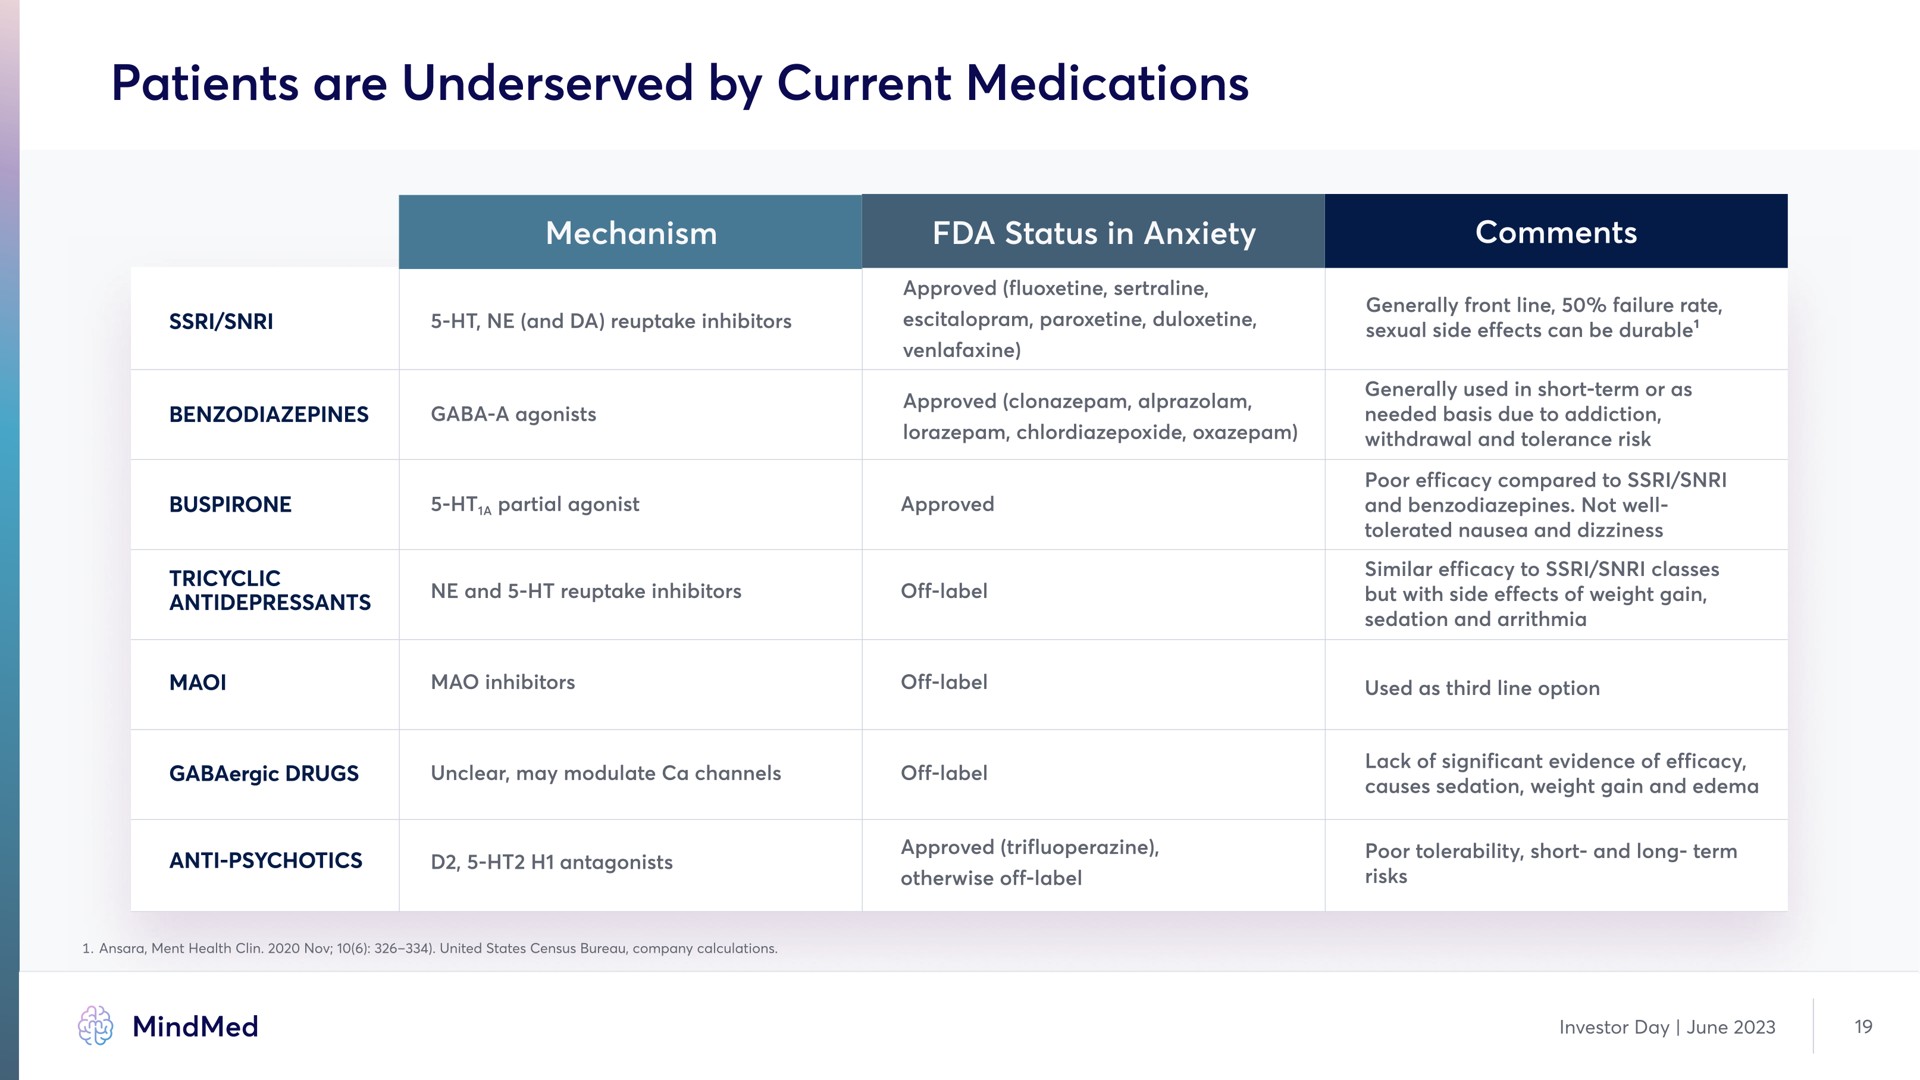 patients are by current medications | MindMed